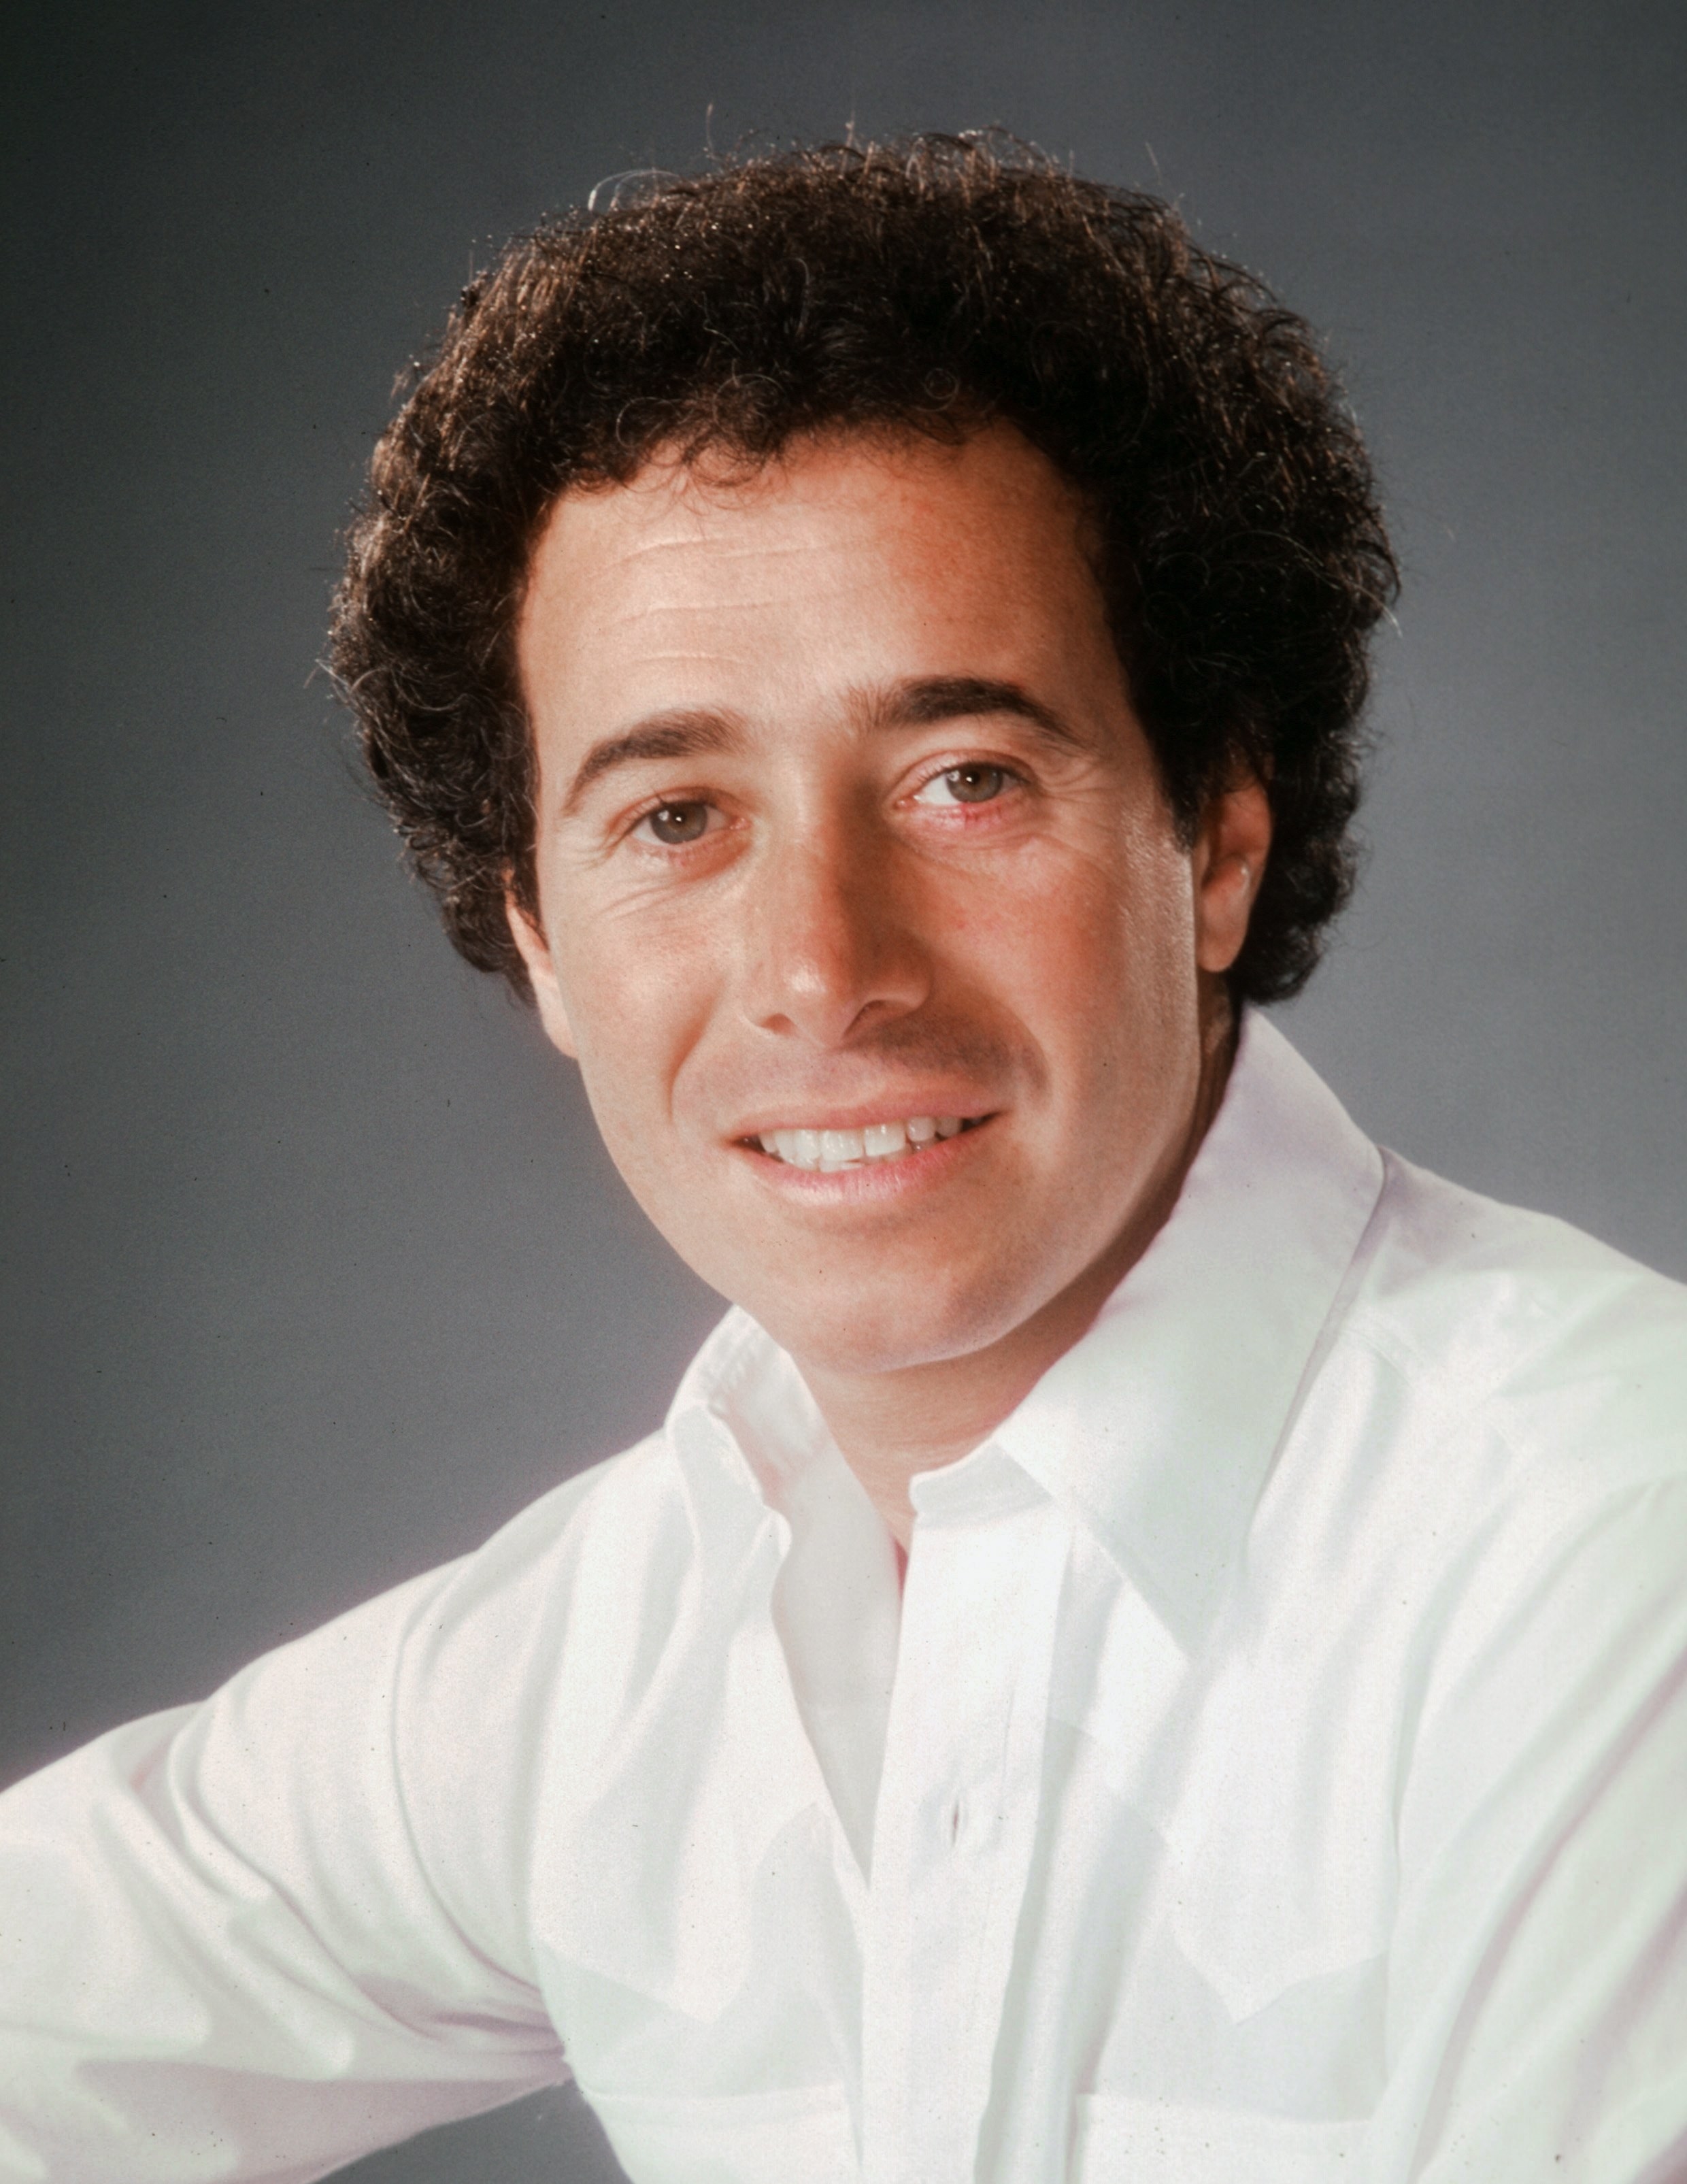 Music Producer David Geffen poses for a portrait in 1980 in Los Angeles, California